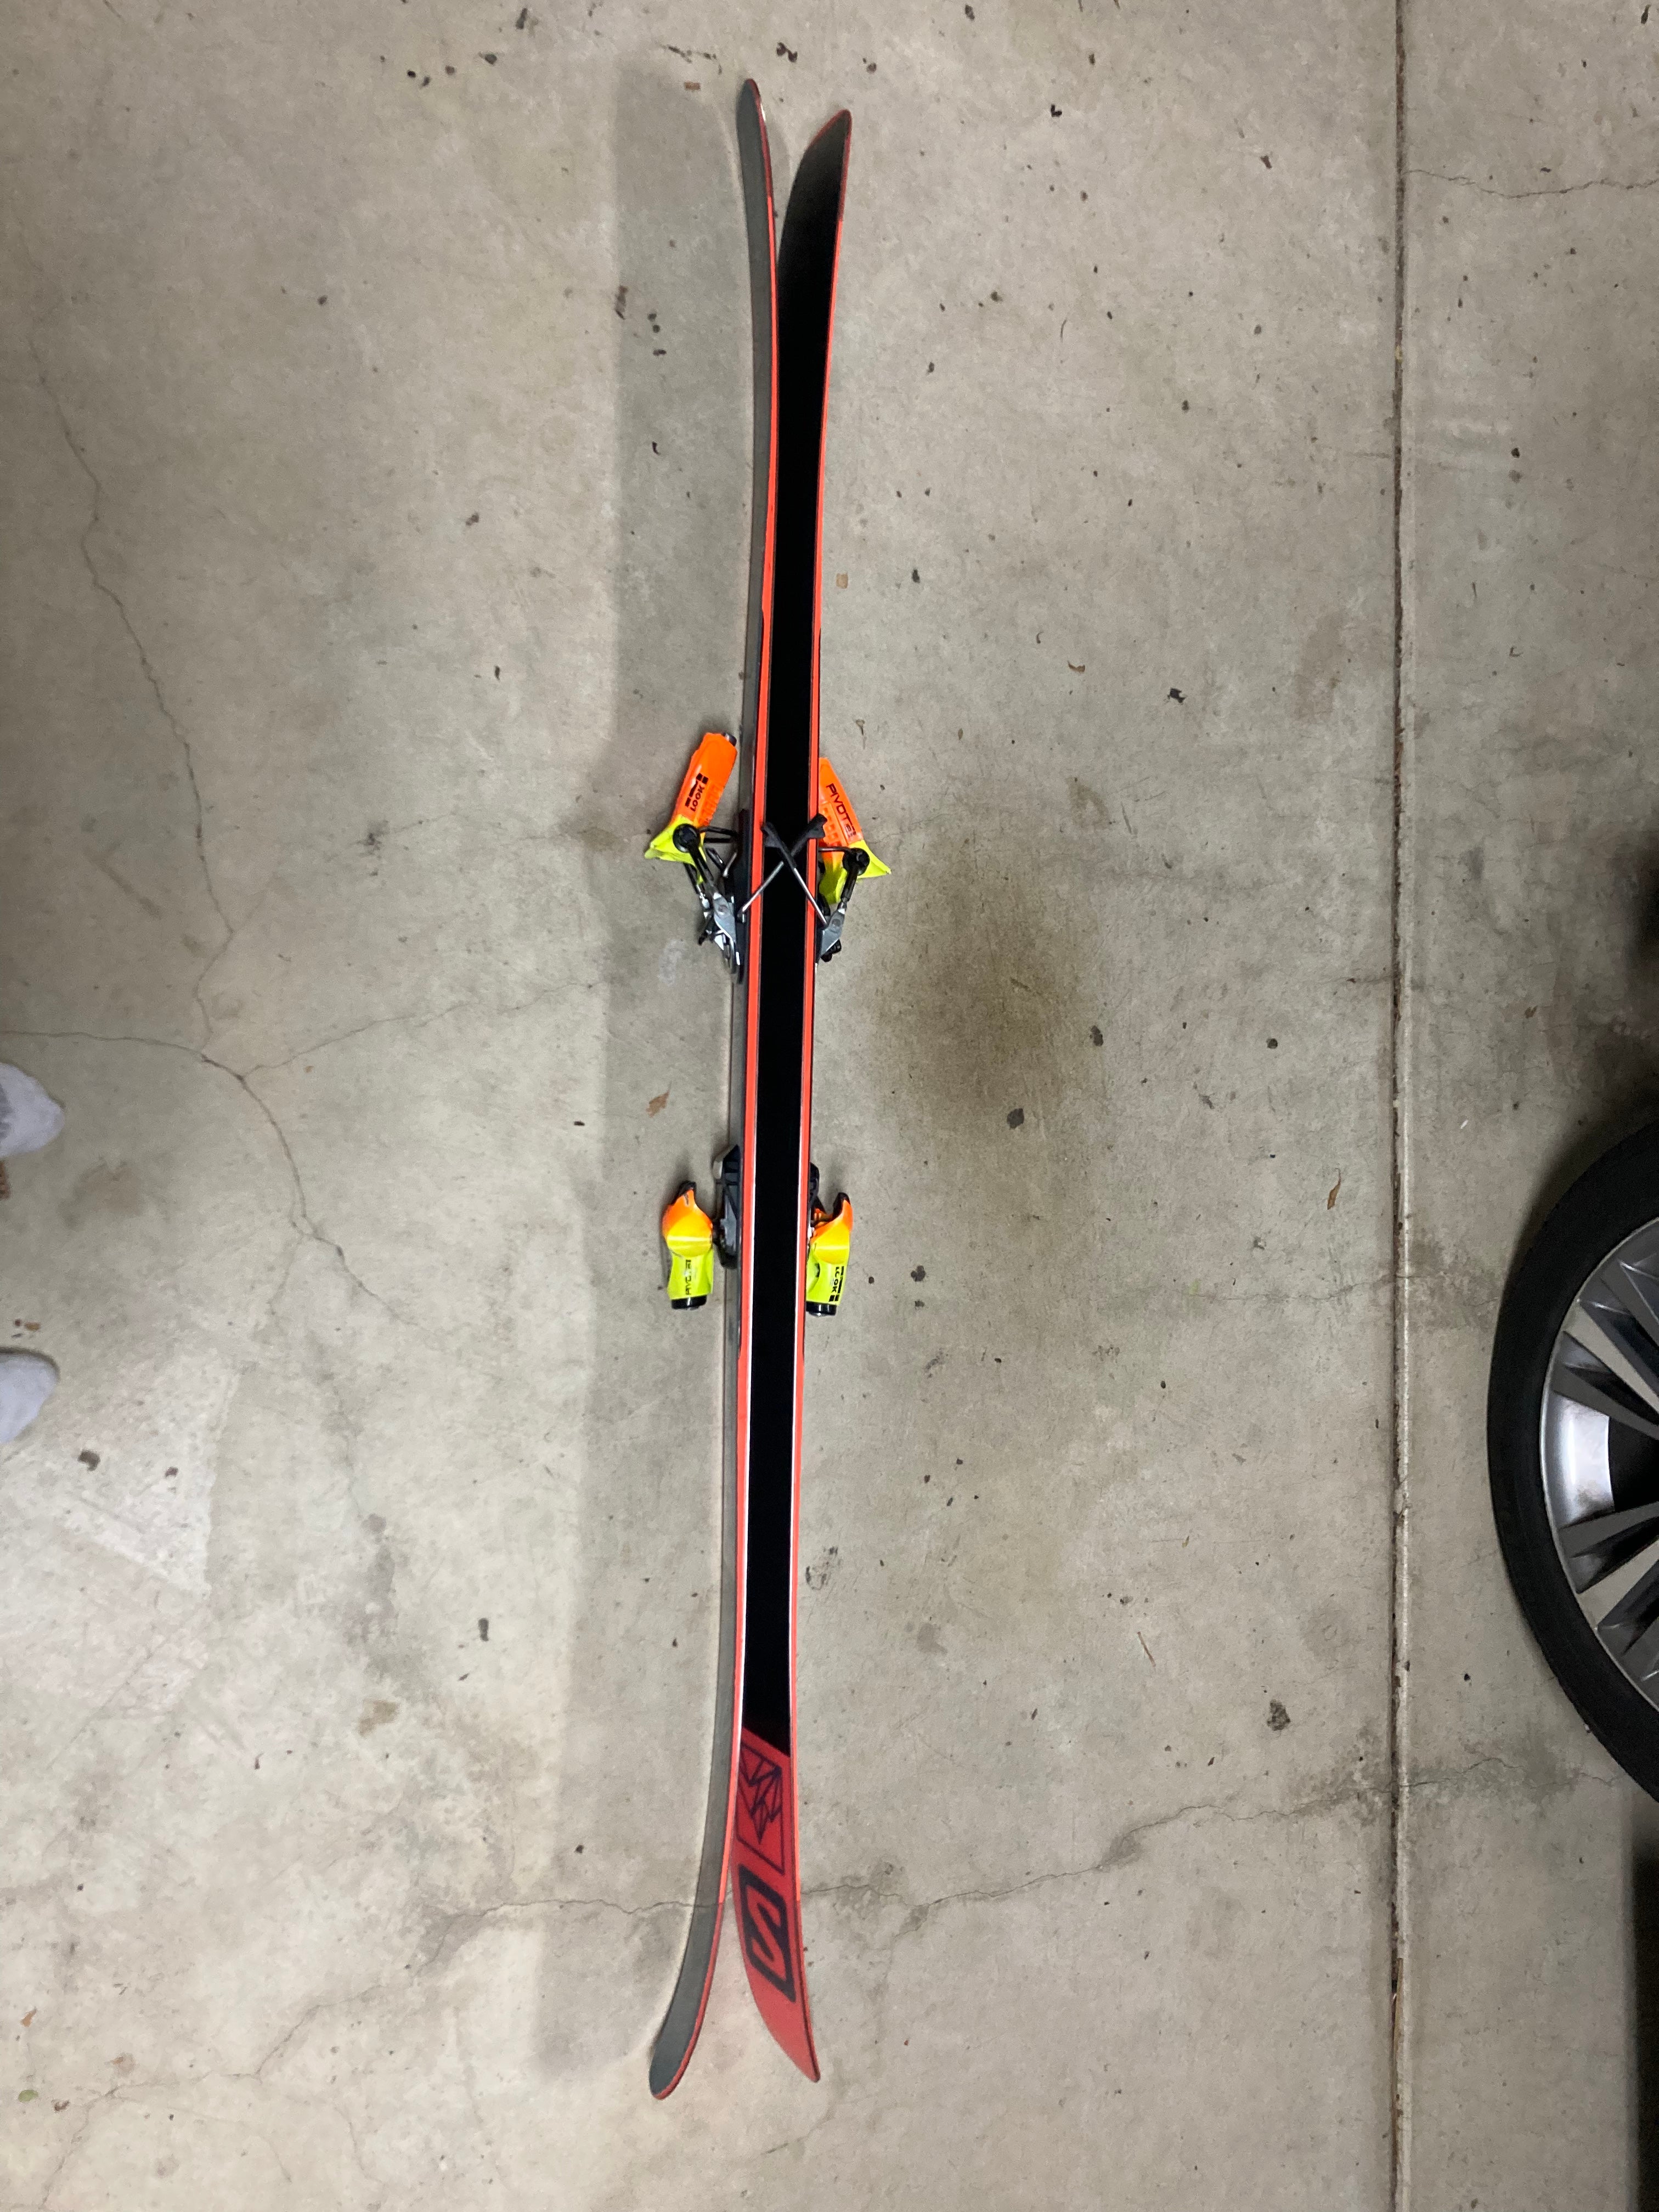 Used Unisex 2021 Salomon 176 cm All Mountain QST 98 Skis With 